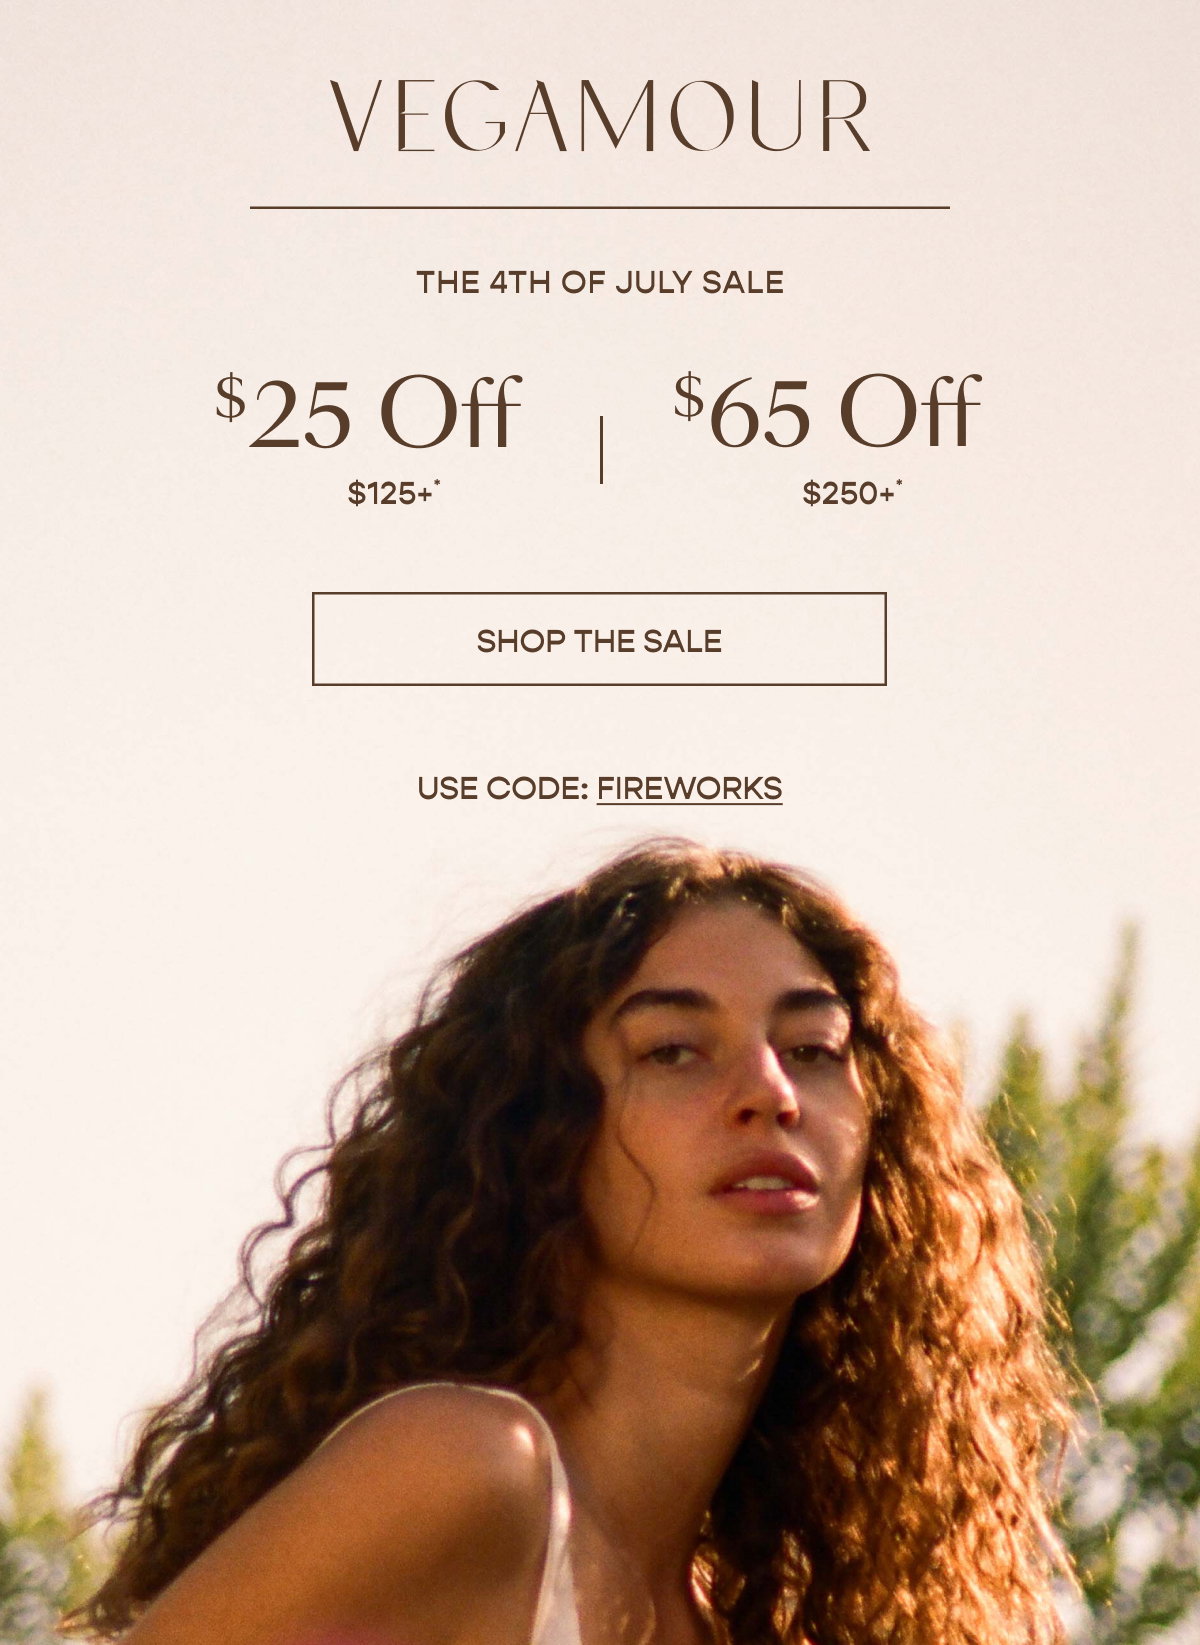 Vegamour. The 4th of July Sale.